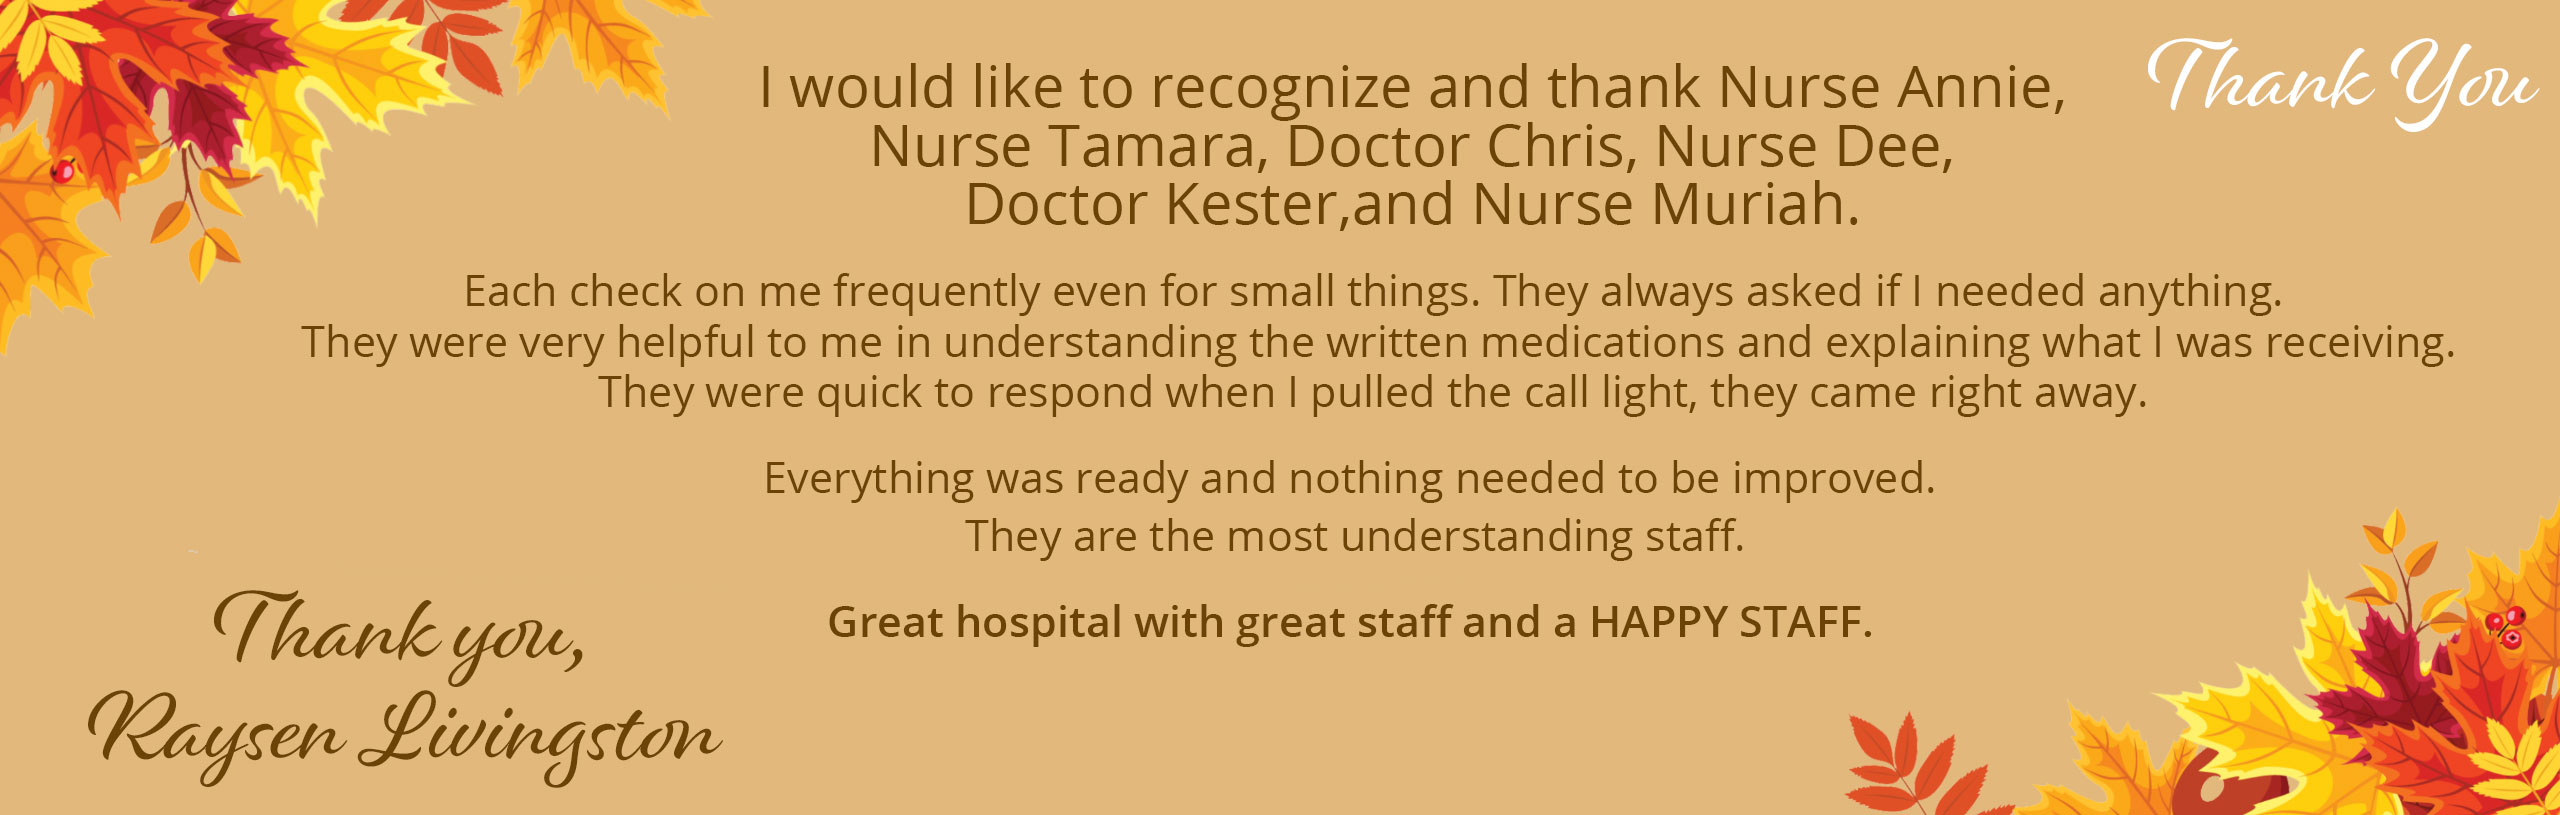 I would like to recognize and thank Nurse Annie, Nurse Tamara, Doctor Chris, Nurse Dee, Doctor Kester, and Nurse Muriah.

Each check on me frequently even for small things. They always ask if I needed anything. They were very helpful to me in understanding the written medications and explaining what I was receiving. They were quick to reaspond when I pulled the call light, they came right away.

Everything was ready and nothing needed to be improved. They are the most understanding staff.

Great hospital with great staff and a HAPPY STAFF.


Thank You,

Raysen Livingston